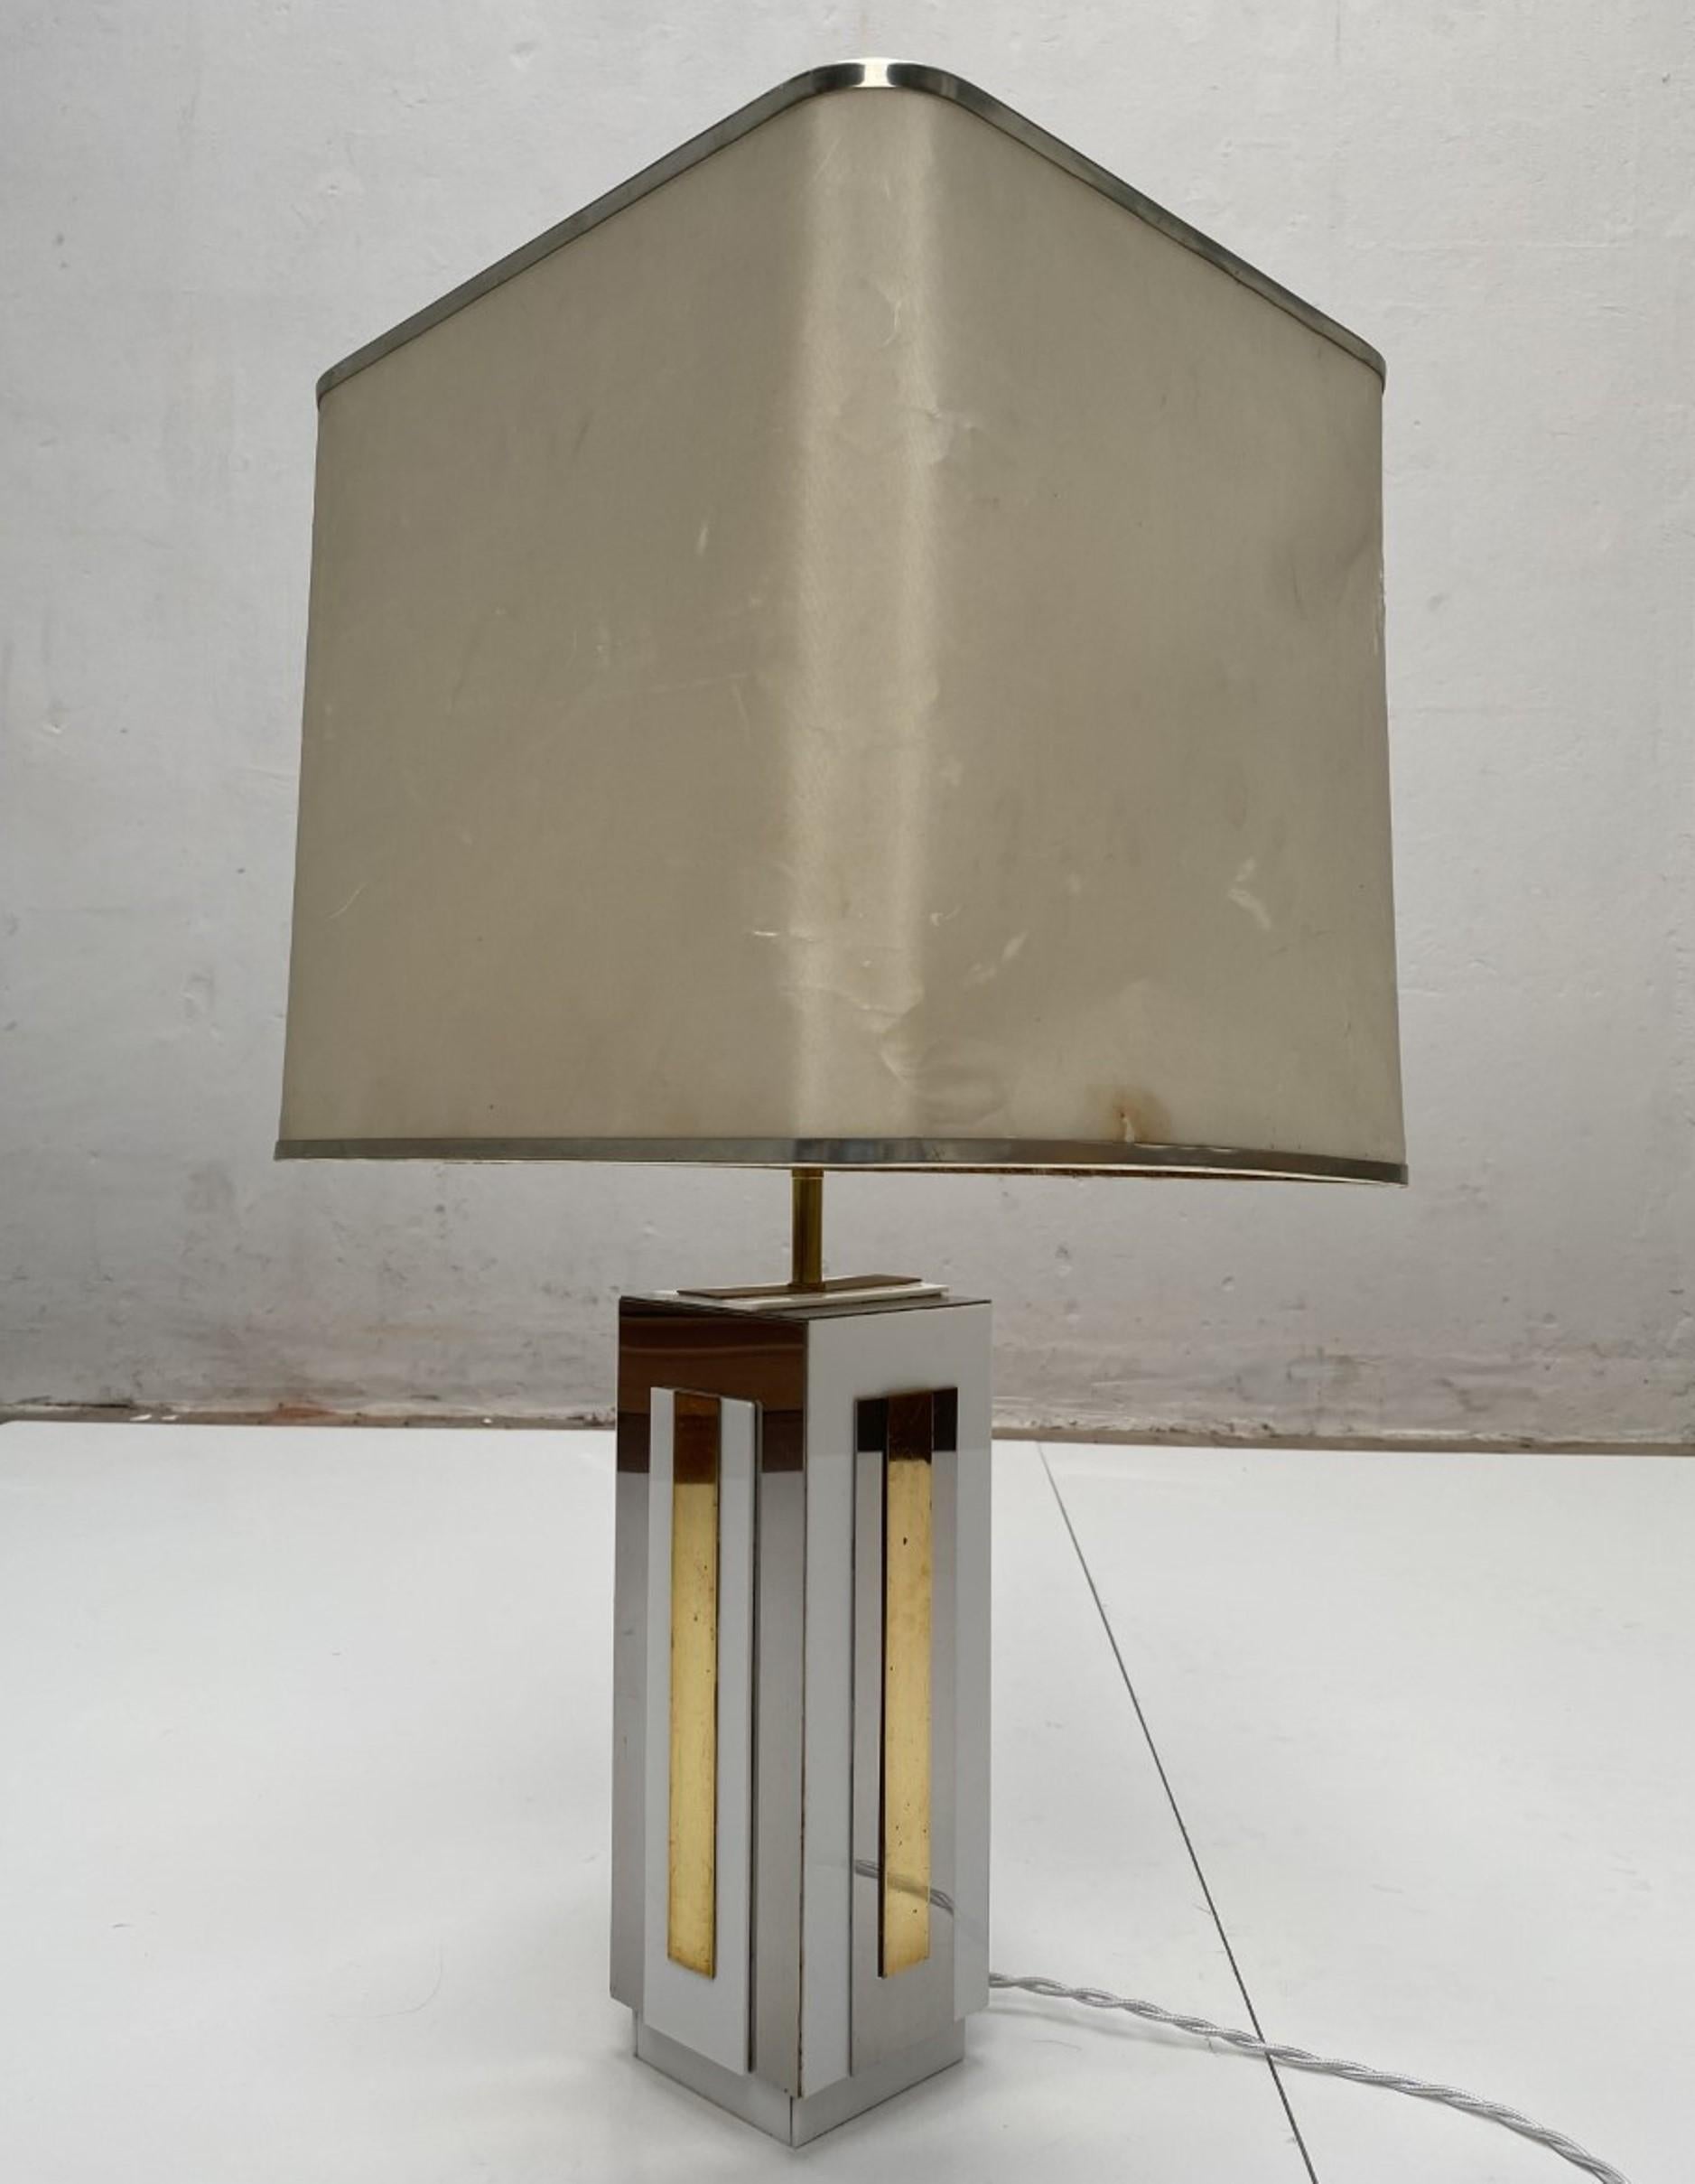 Sculptural Relief Table Lamp by Sculptor 'PH Jean' 1970 Brass Inox Lucite Signed For Sale 4